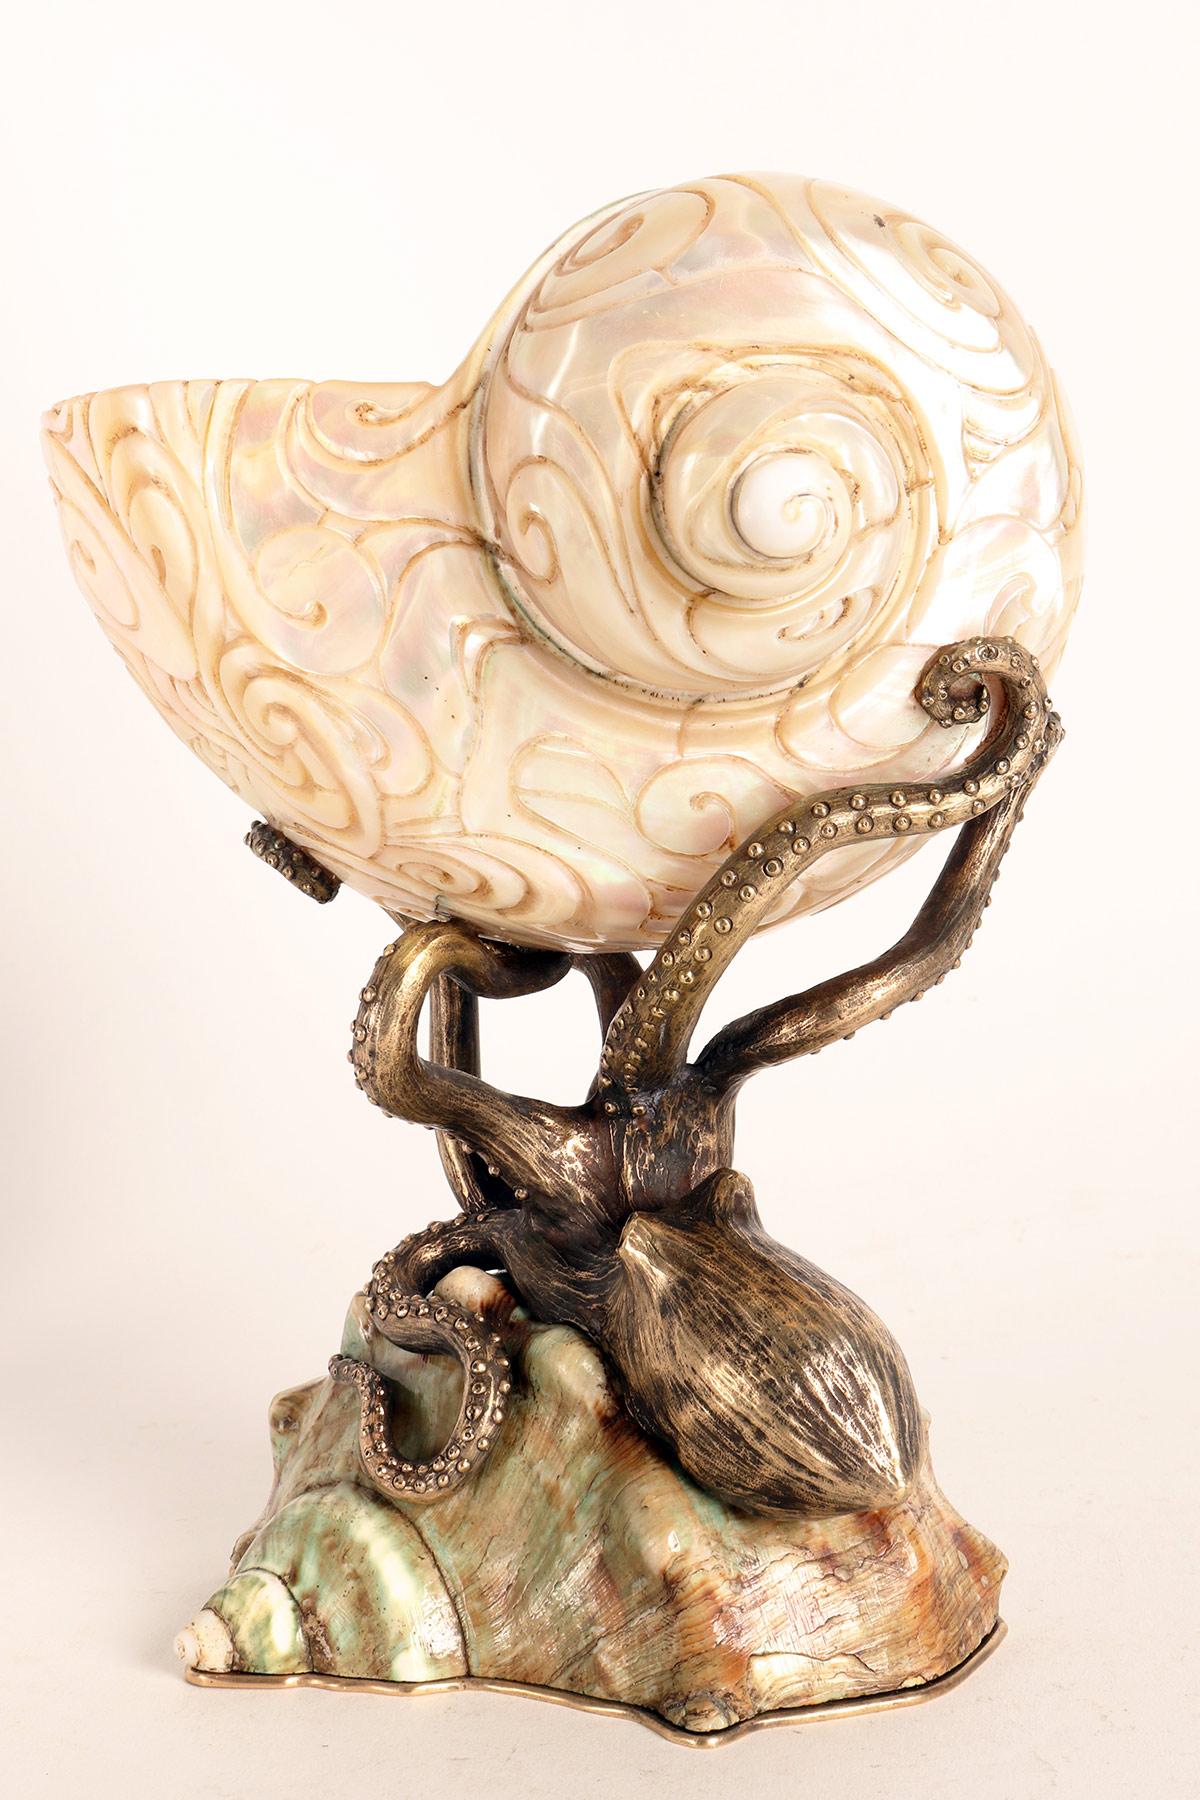 A cup with a shell of Turbo marmoratus, Germany 1870.  1